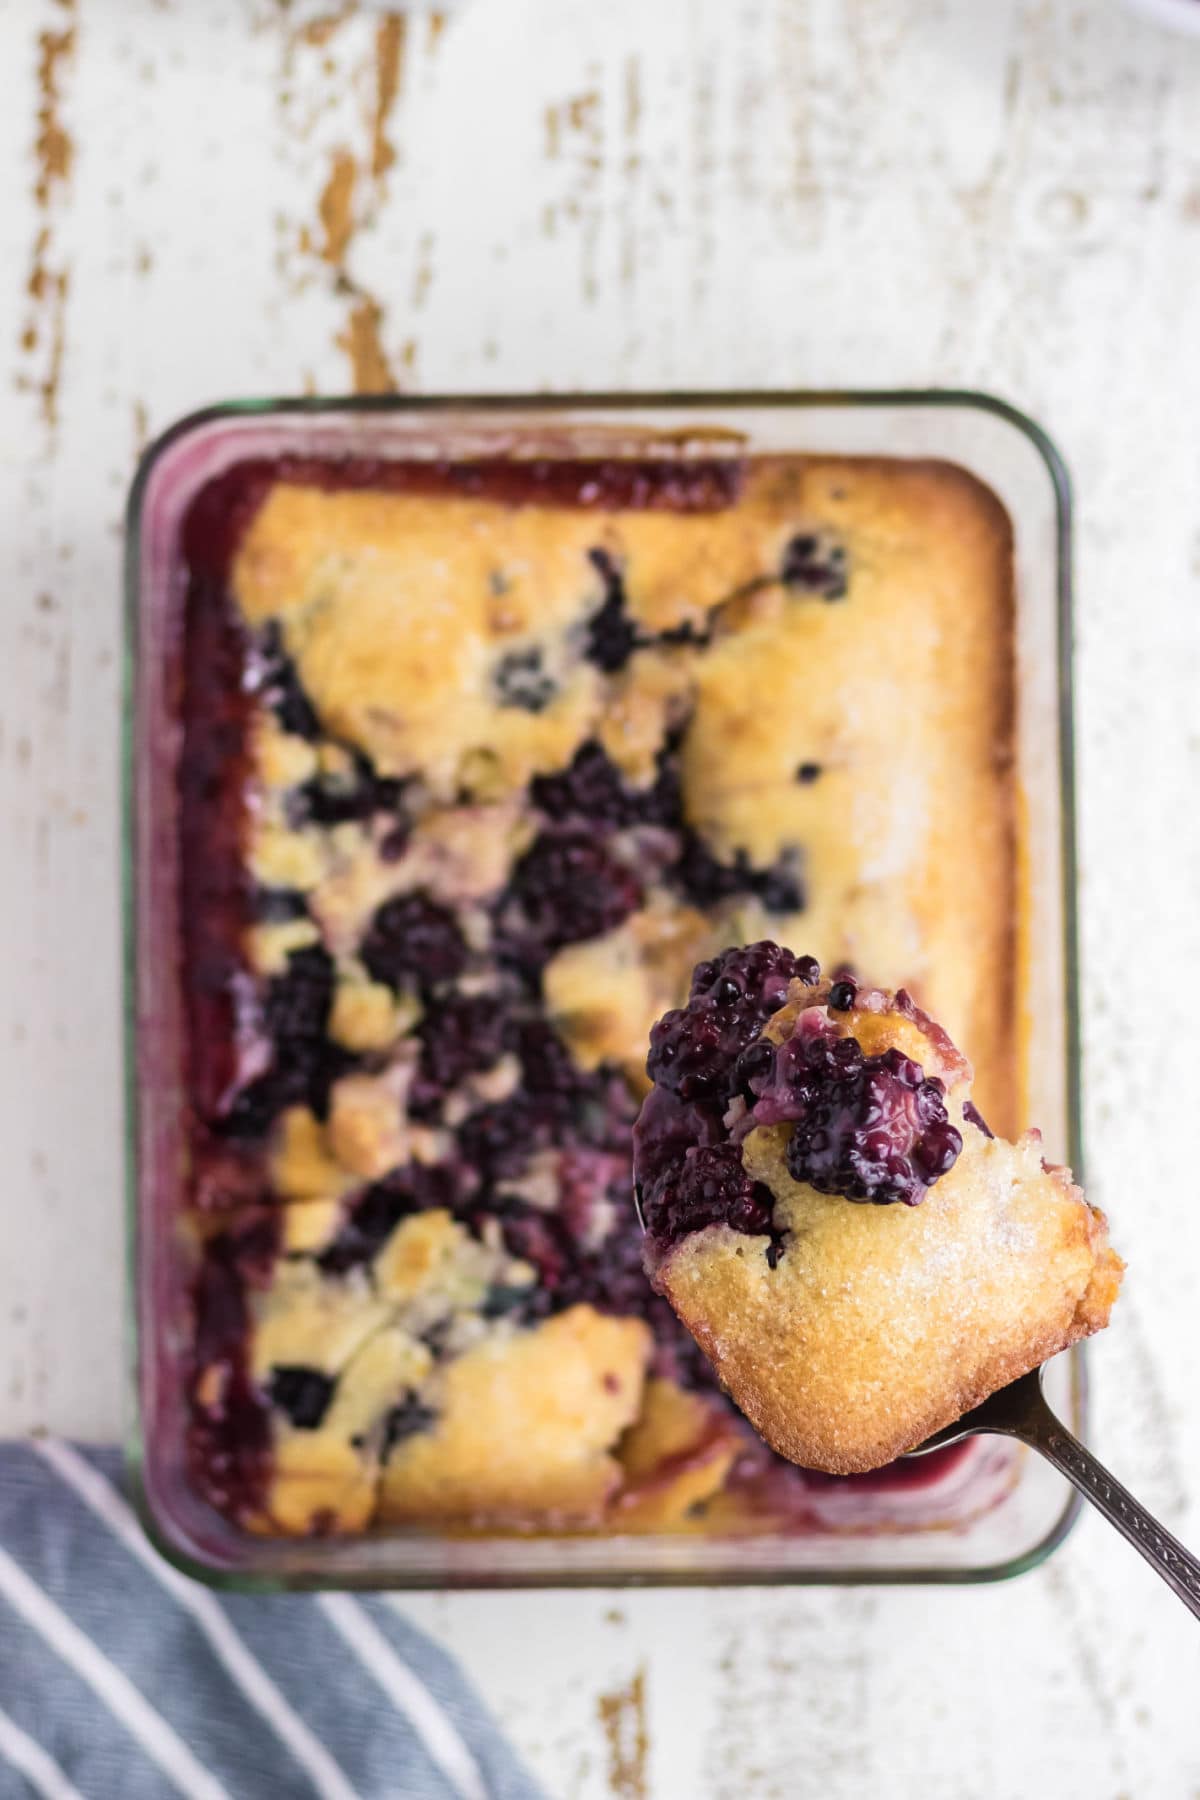 A serving of blackberry cobbler is being removed from the pan.